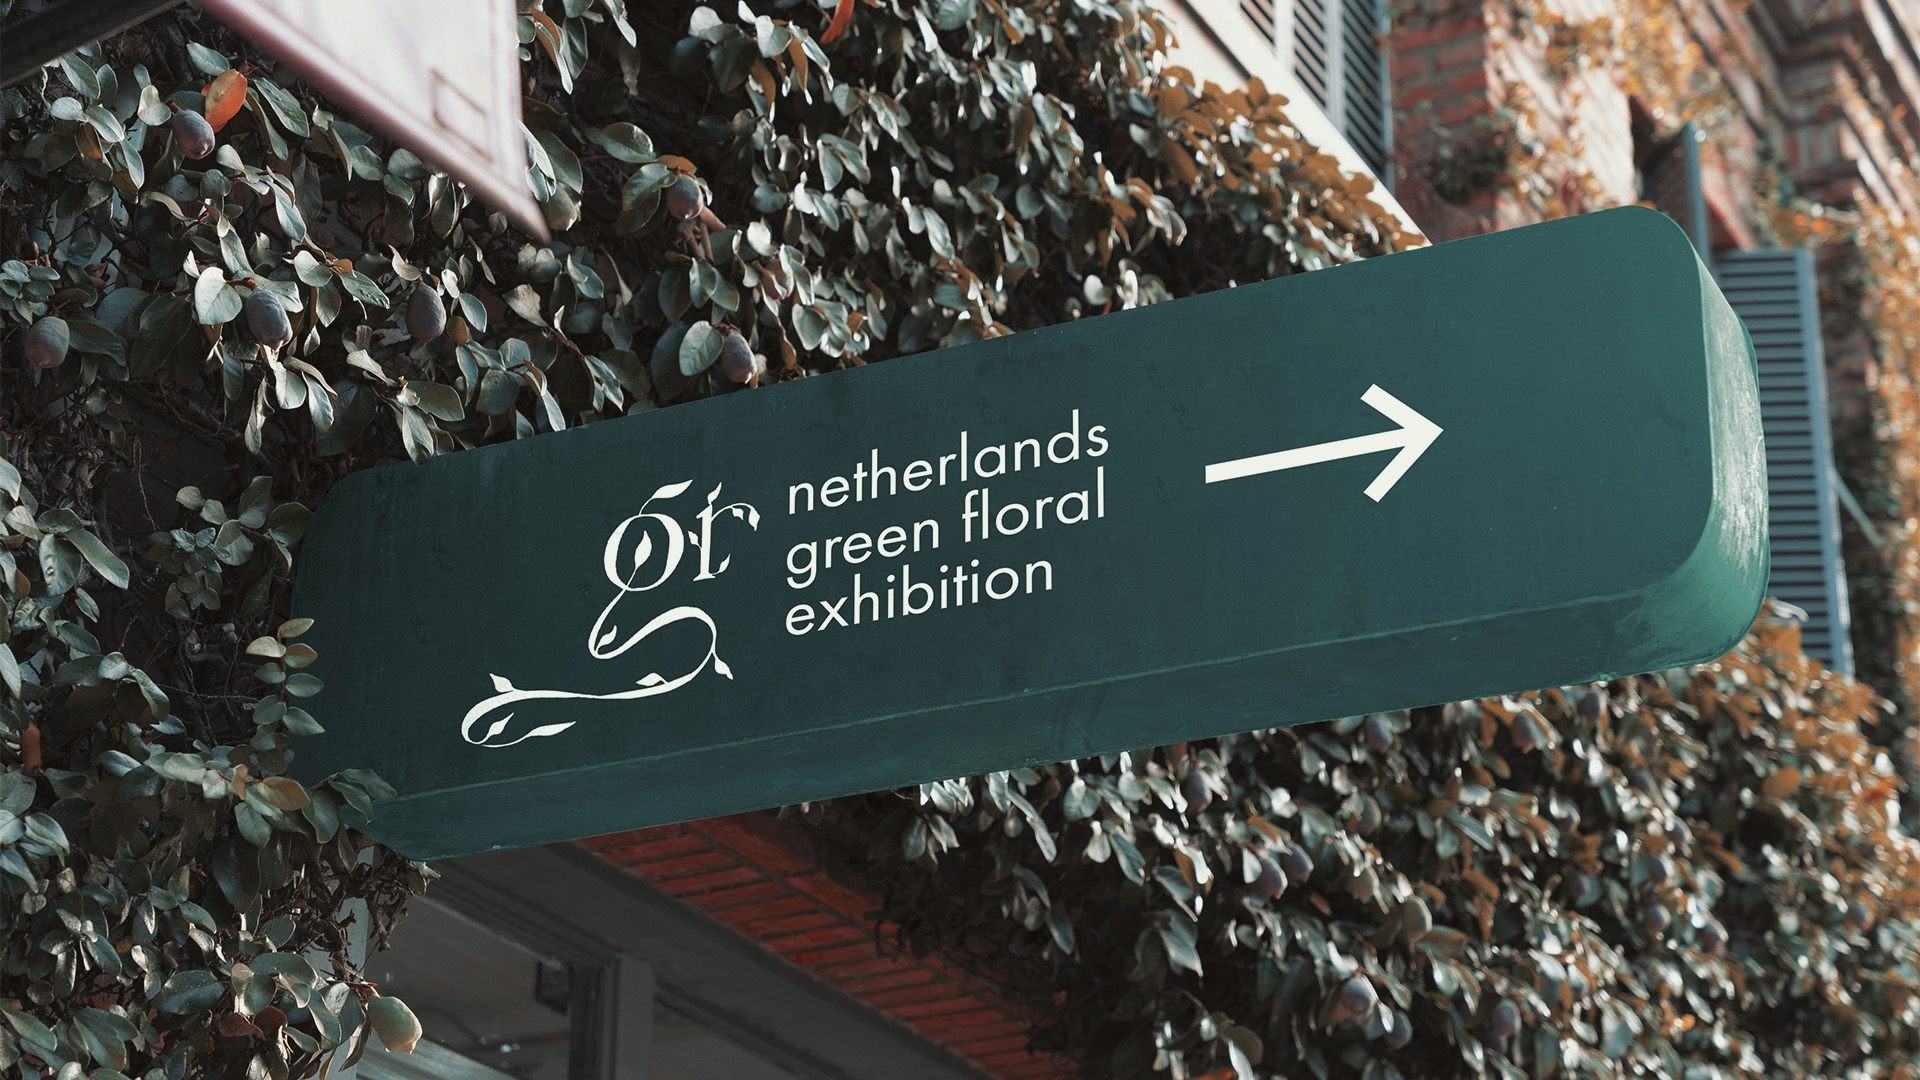 Green Floral Exhibition in Netherlands by Student Sophie Tsoy